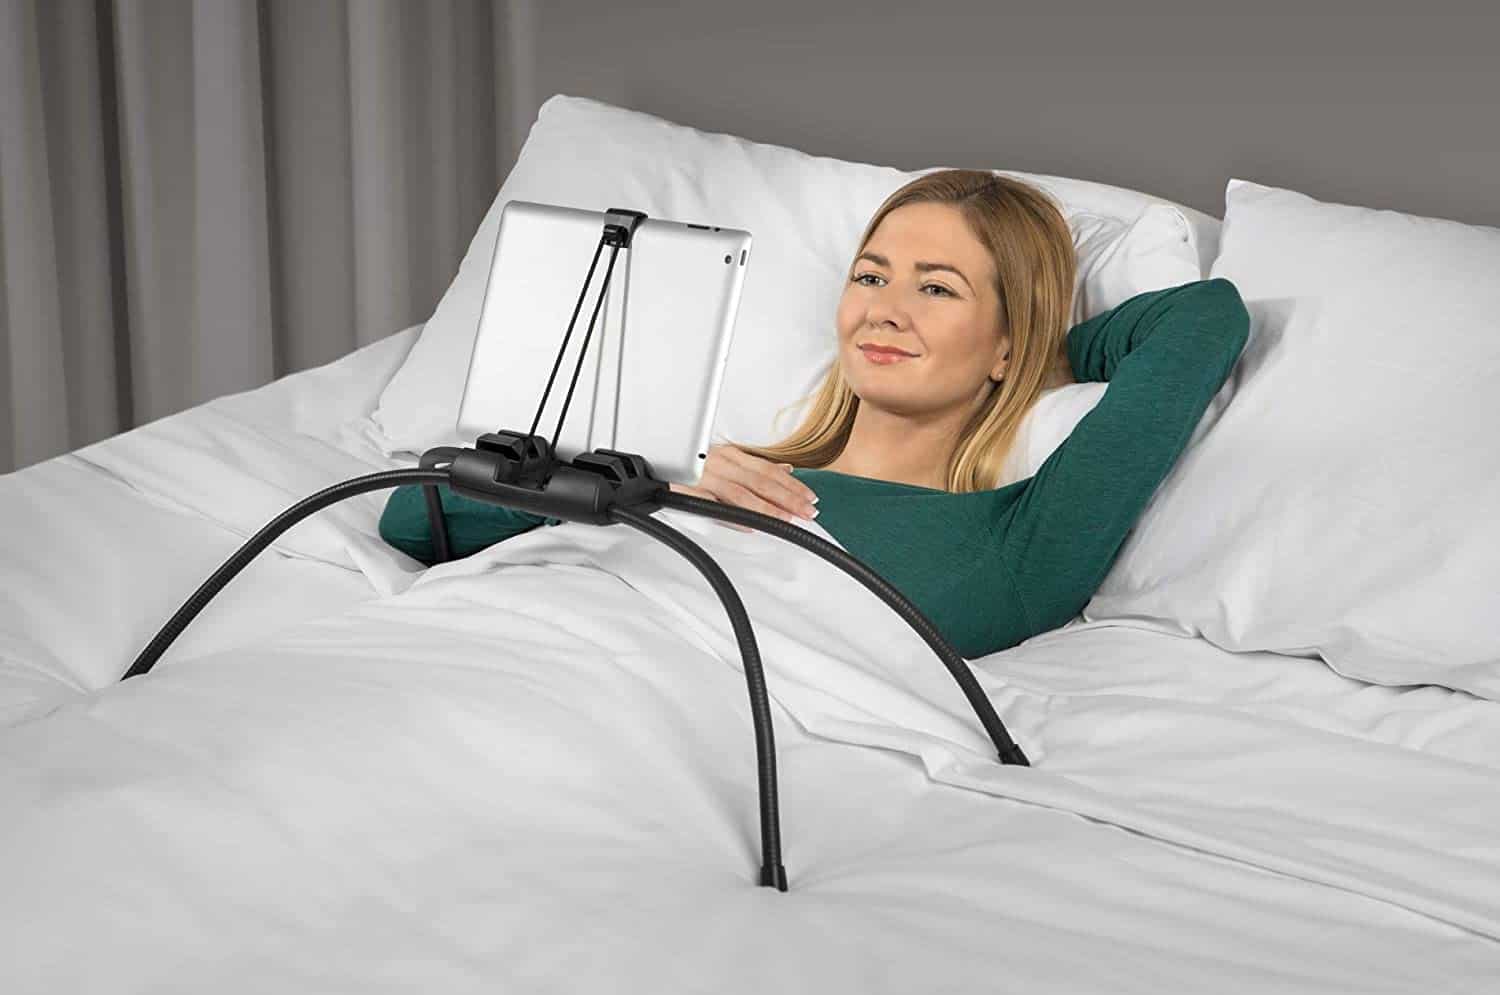 Tablift Tablet Stand for The Bed